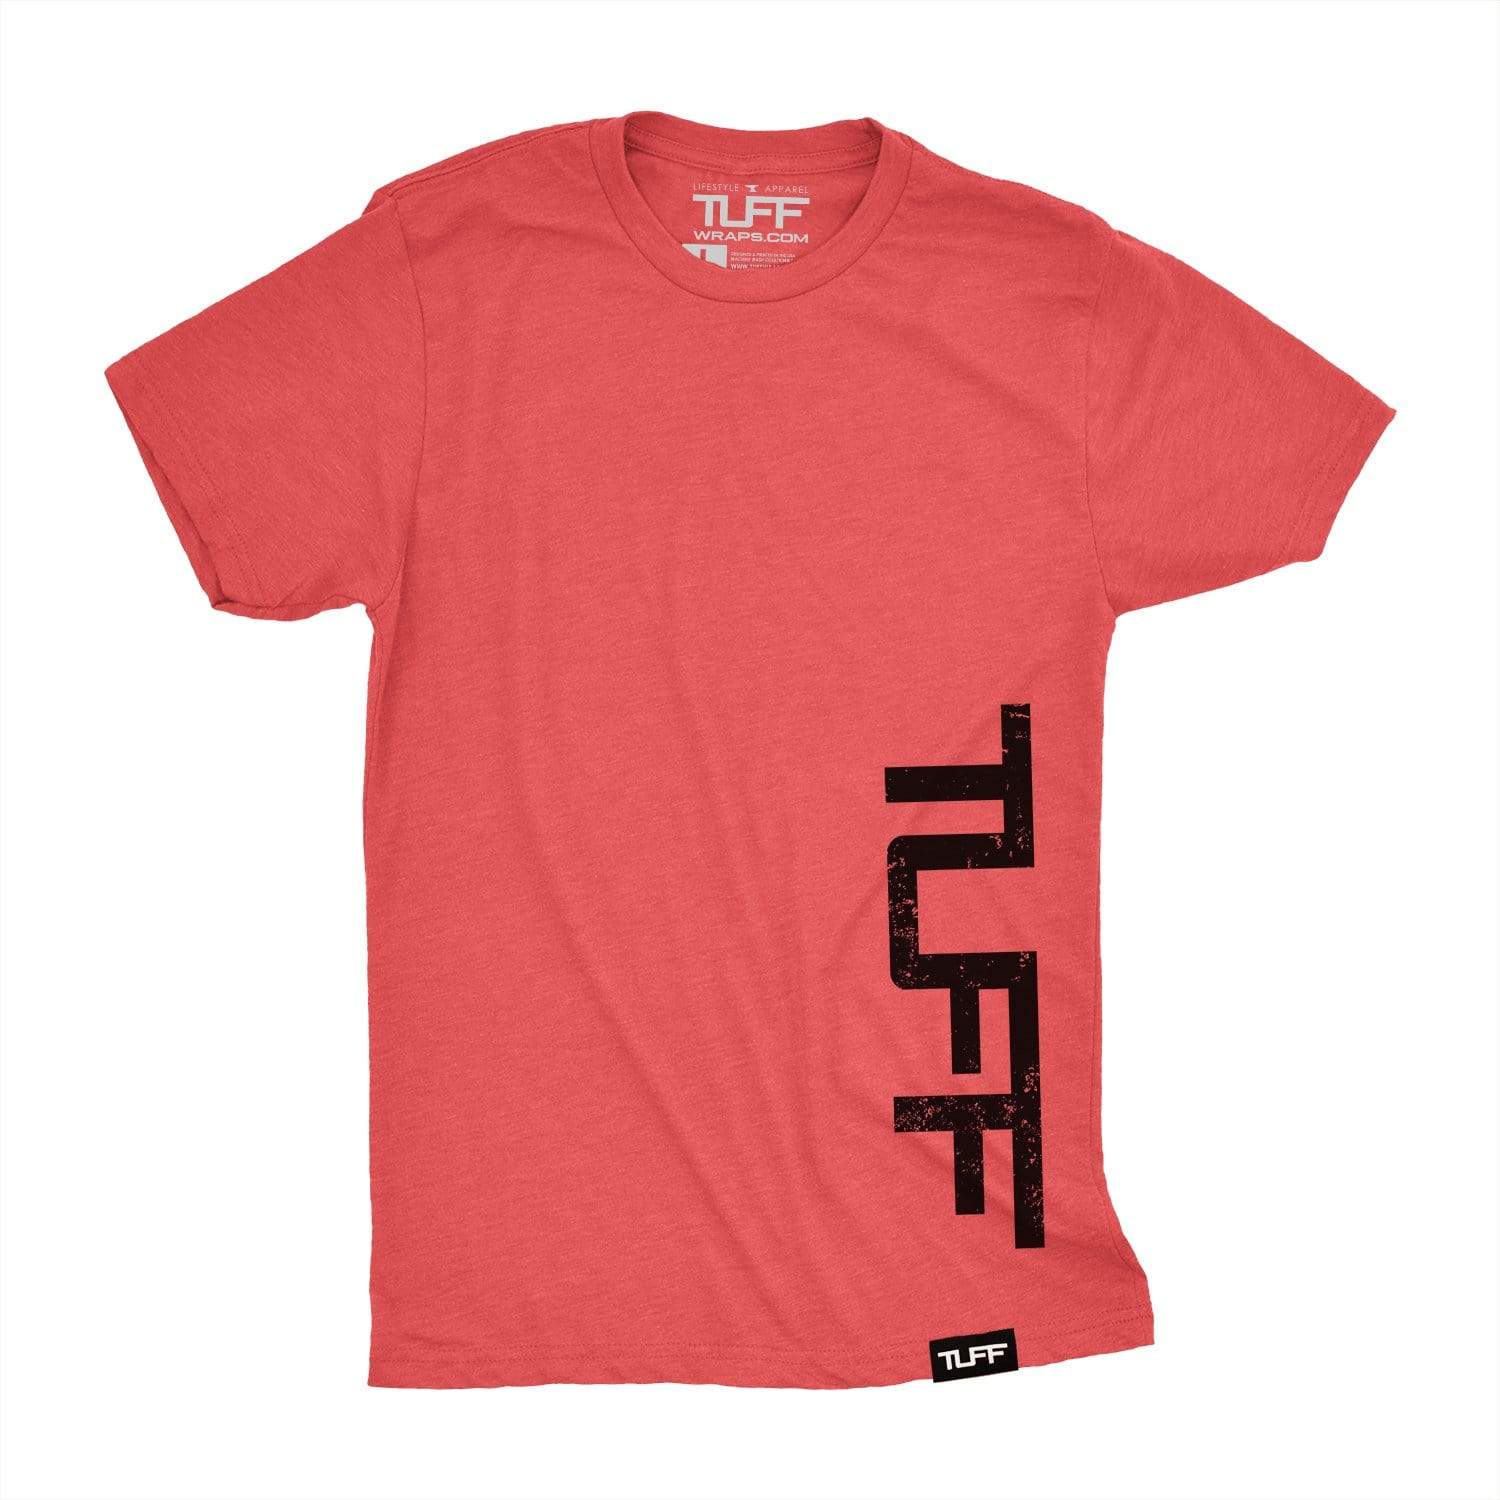 Tuff Athletics workout t shirt gray small  Clothes design, Active wear  tops, Red blouses